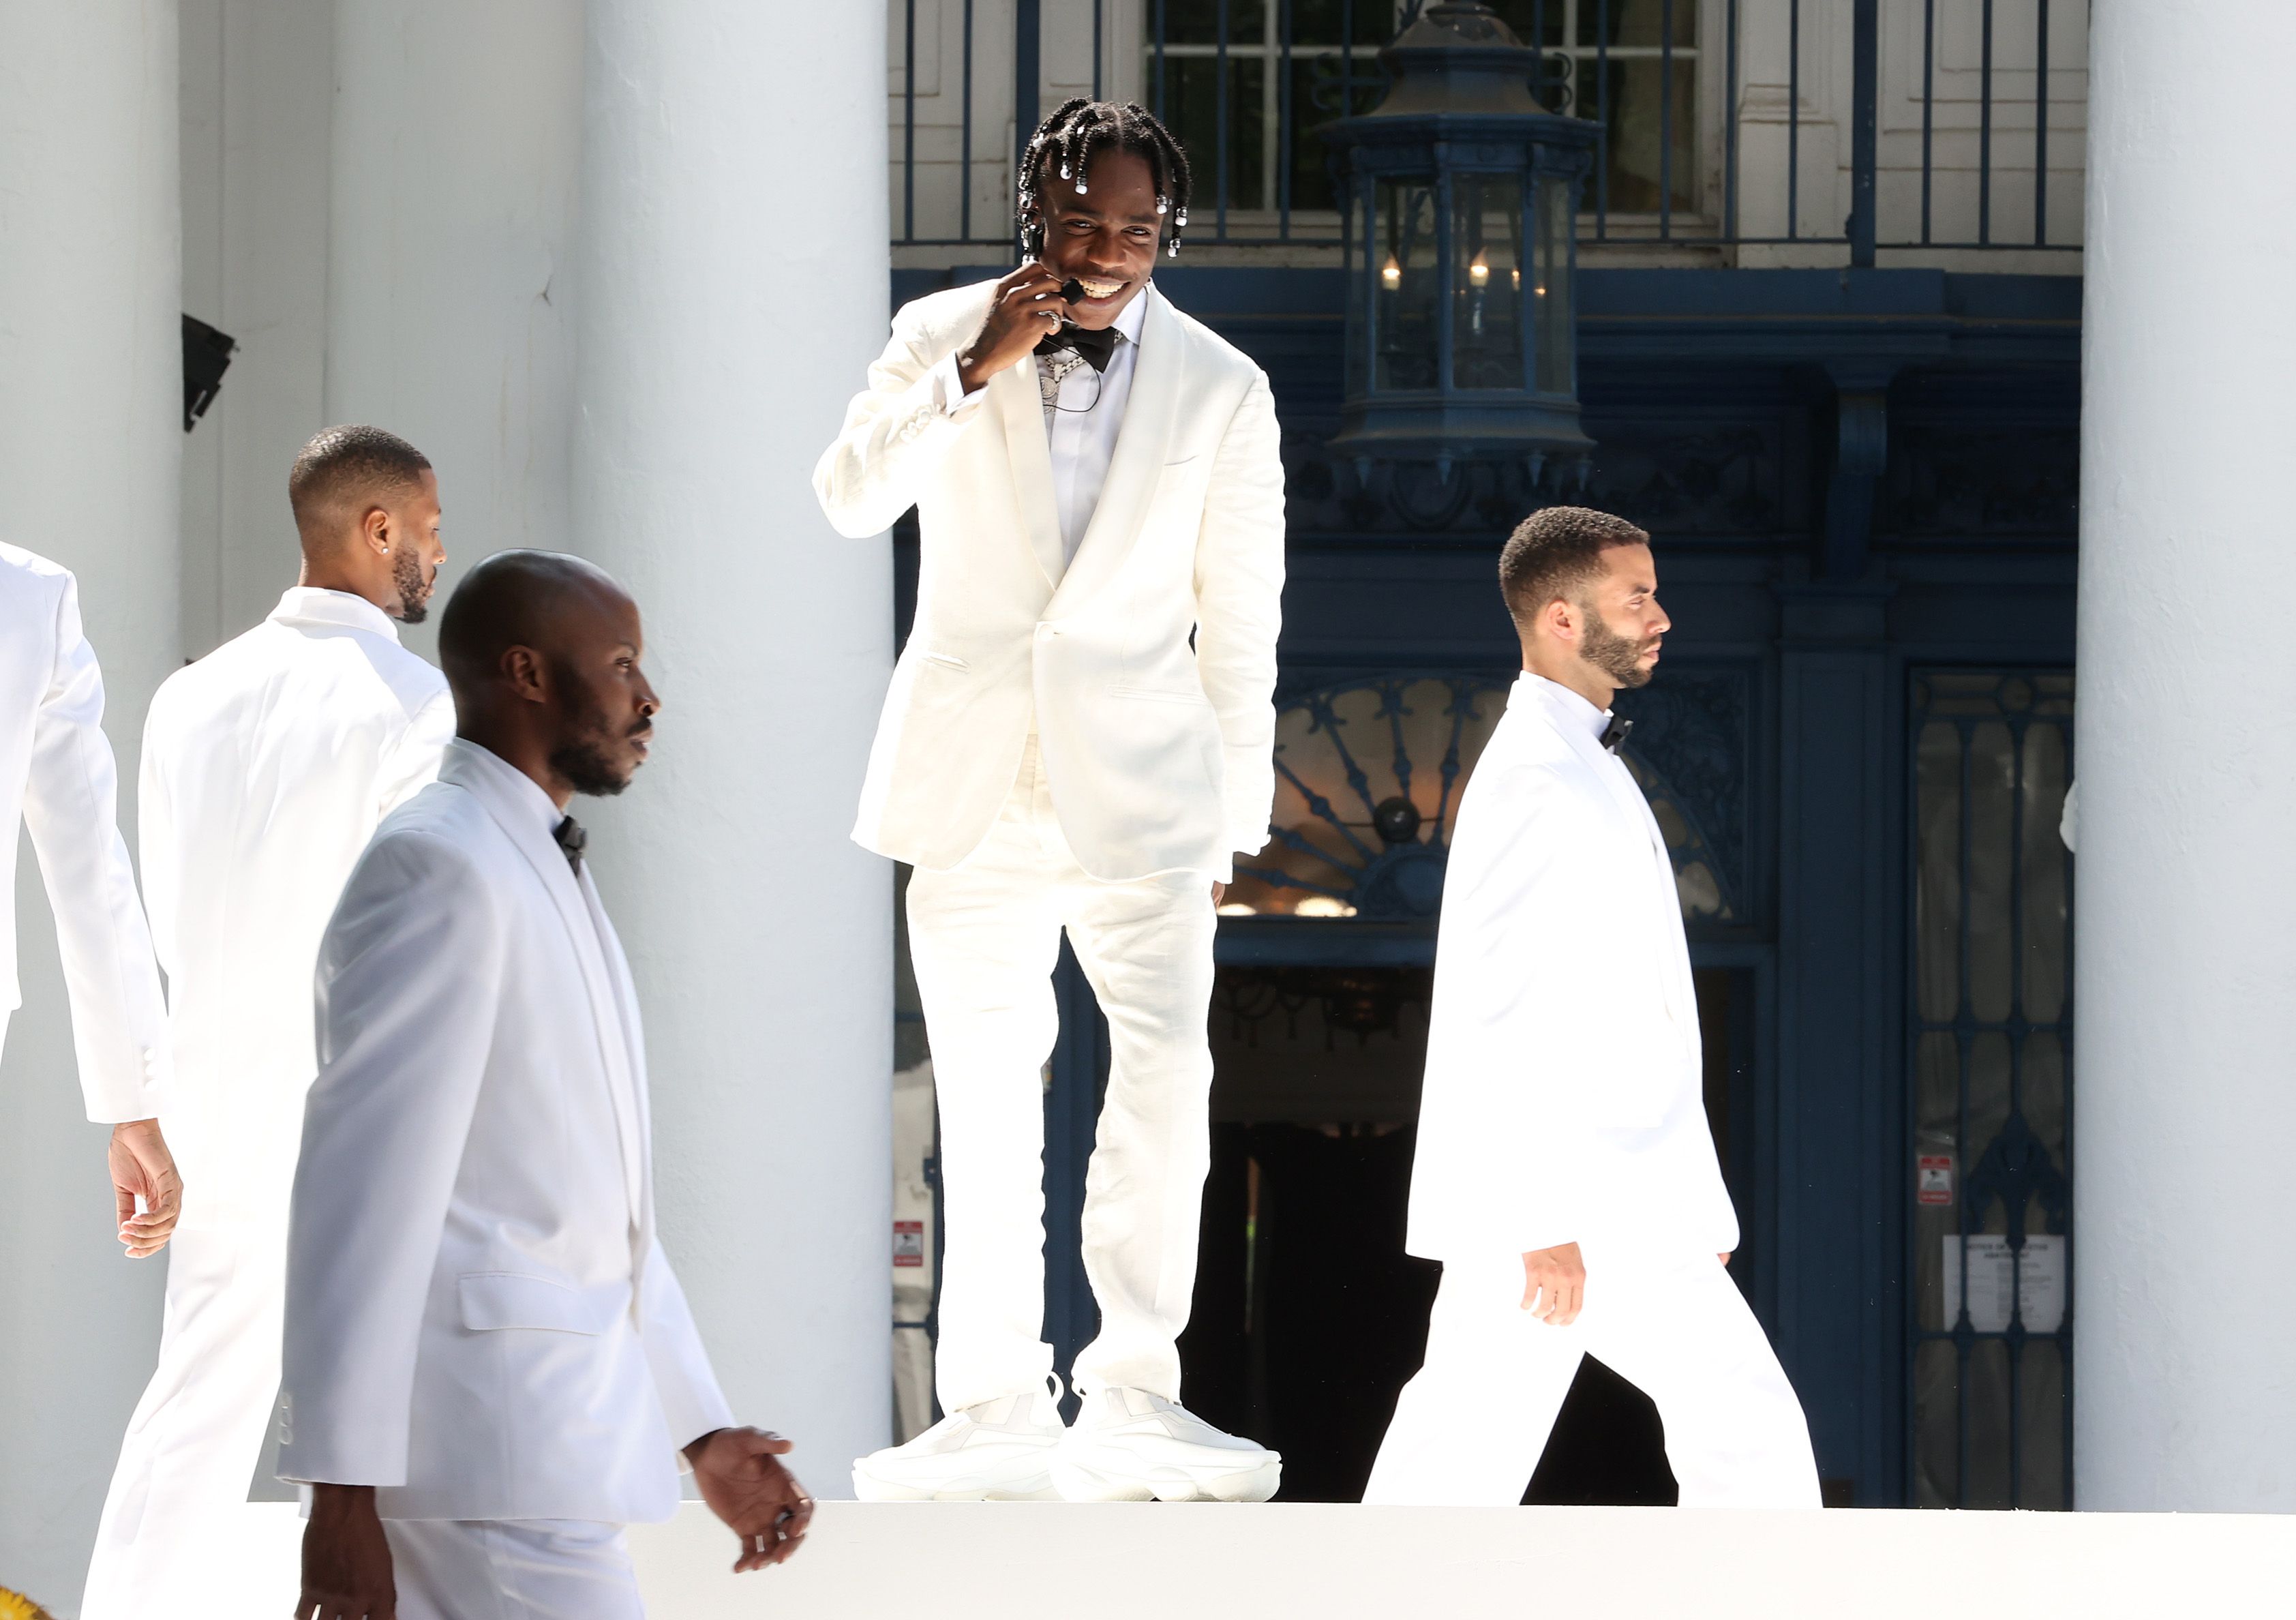 Pyer Moss aka Kerby Jean-Raymond closes Paris Haute Couture with Wat U Iz  collection celebrating Black Invention – A Shaded View on Fashion